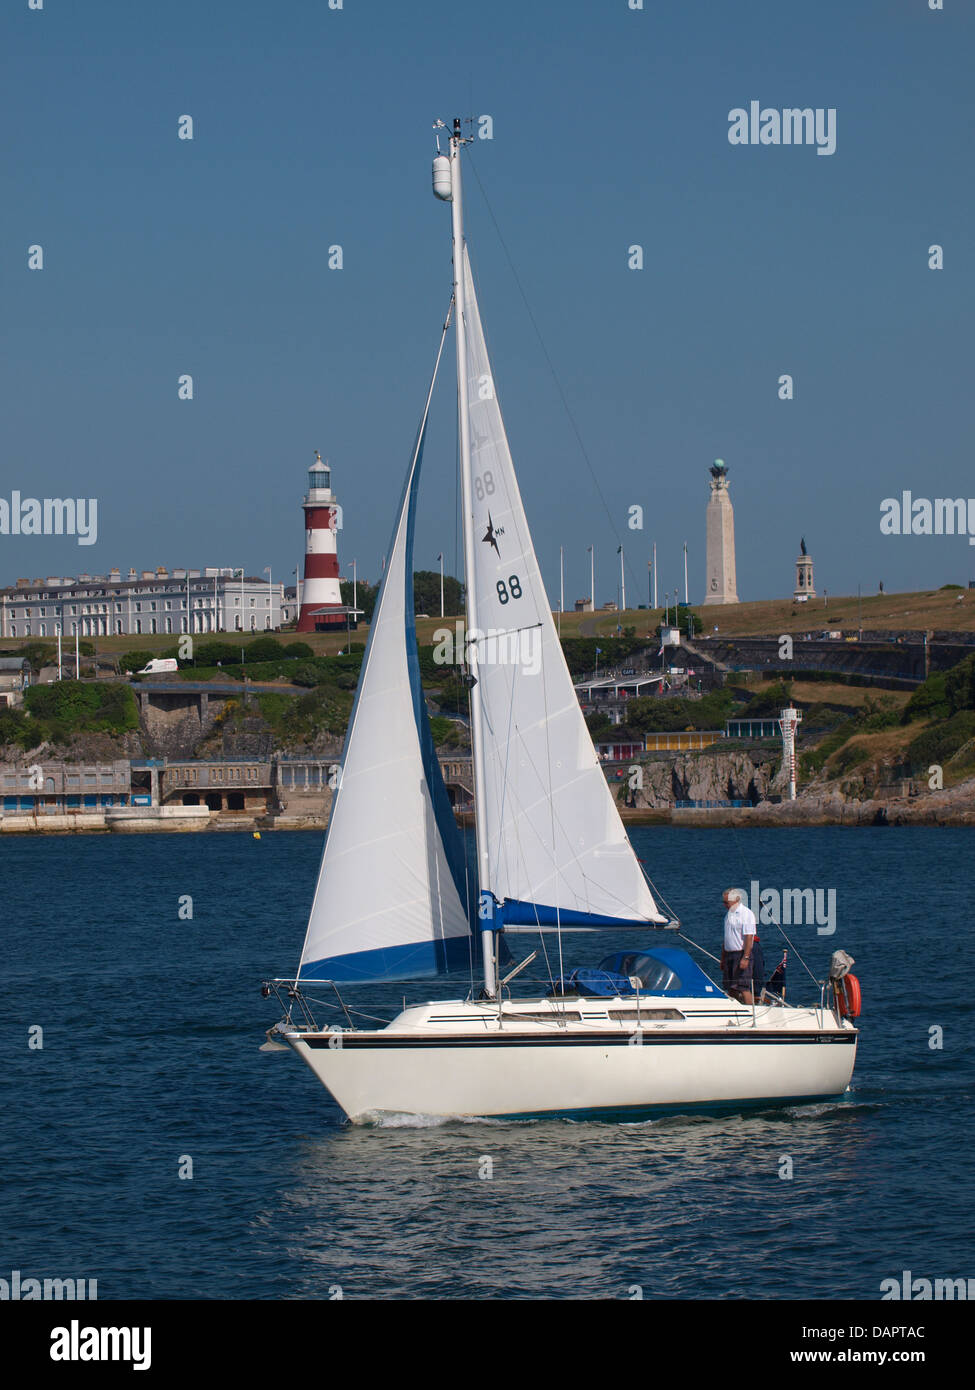 Yacht on the Plym Estuary going past Plymouth Hoe and the Smeaton's Tower, UK 2013 Stock Photo